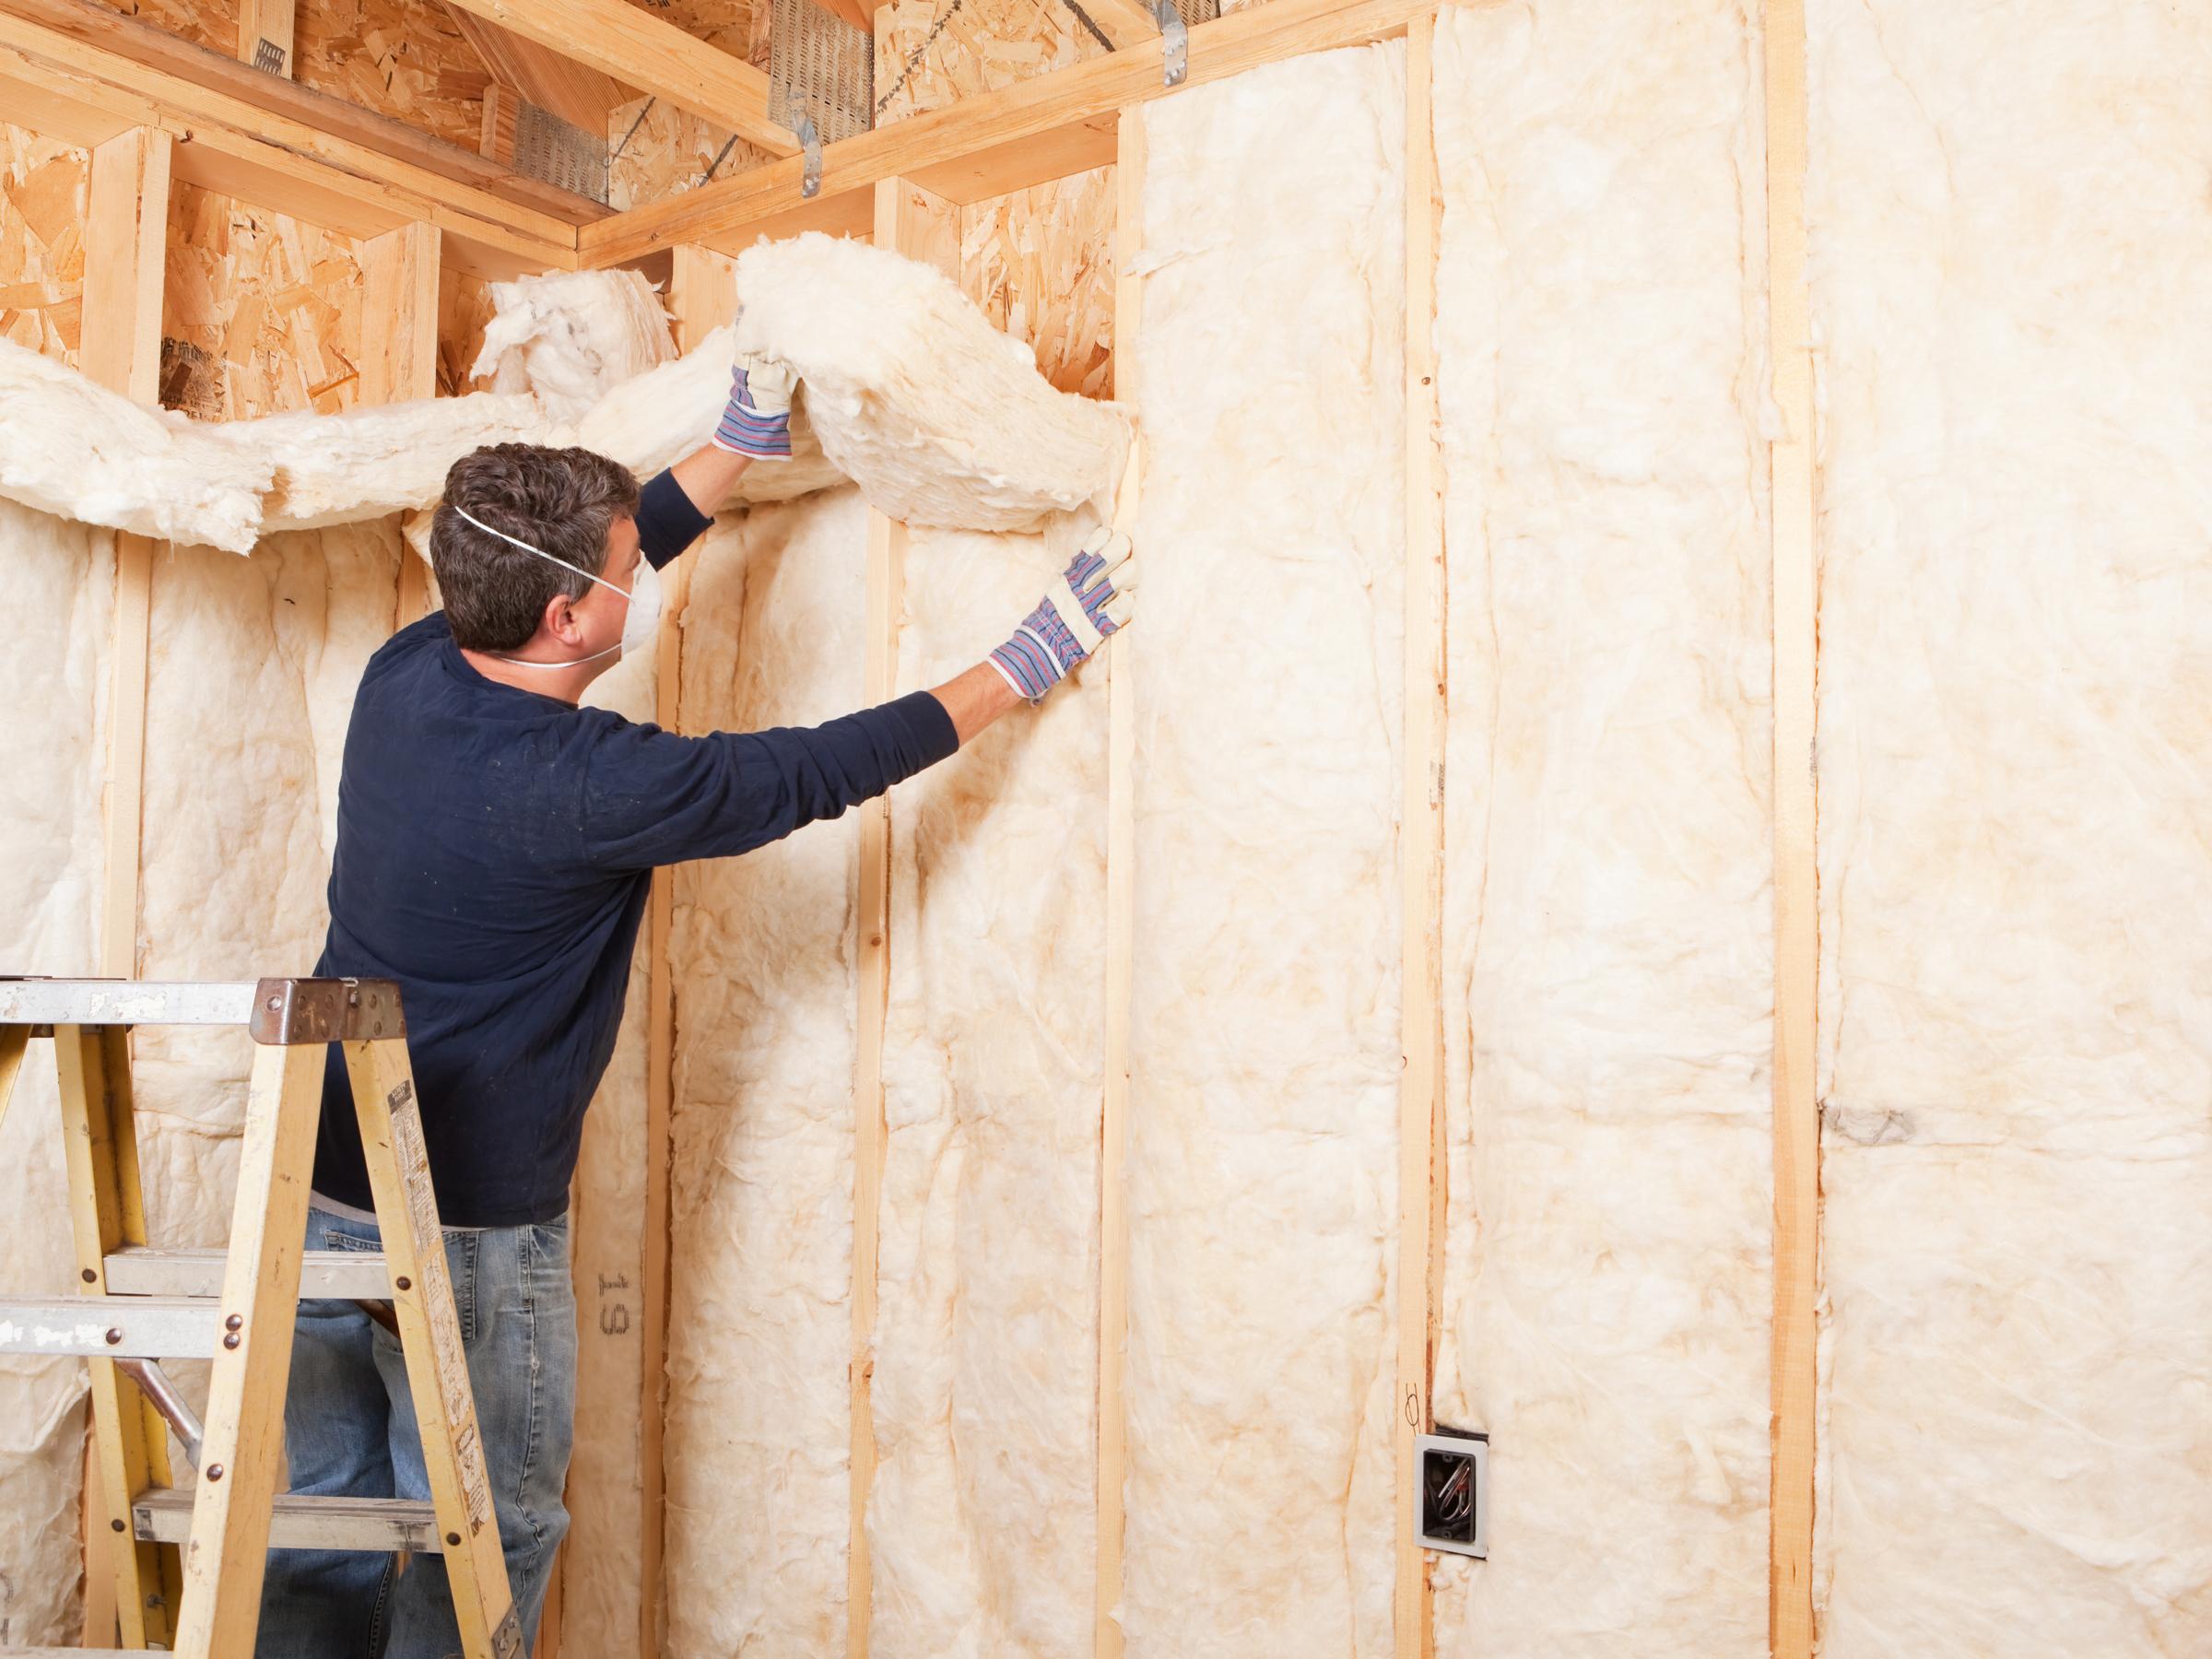 Private Construction Insurance - when you build or remodel